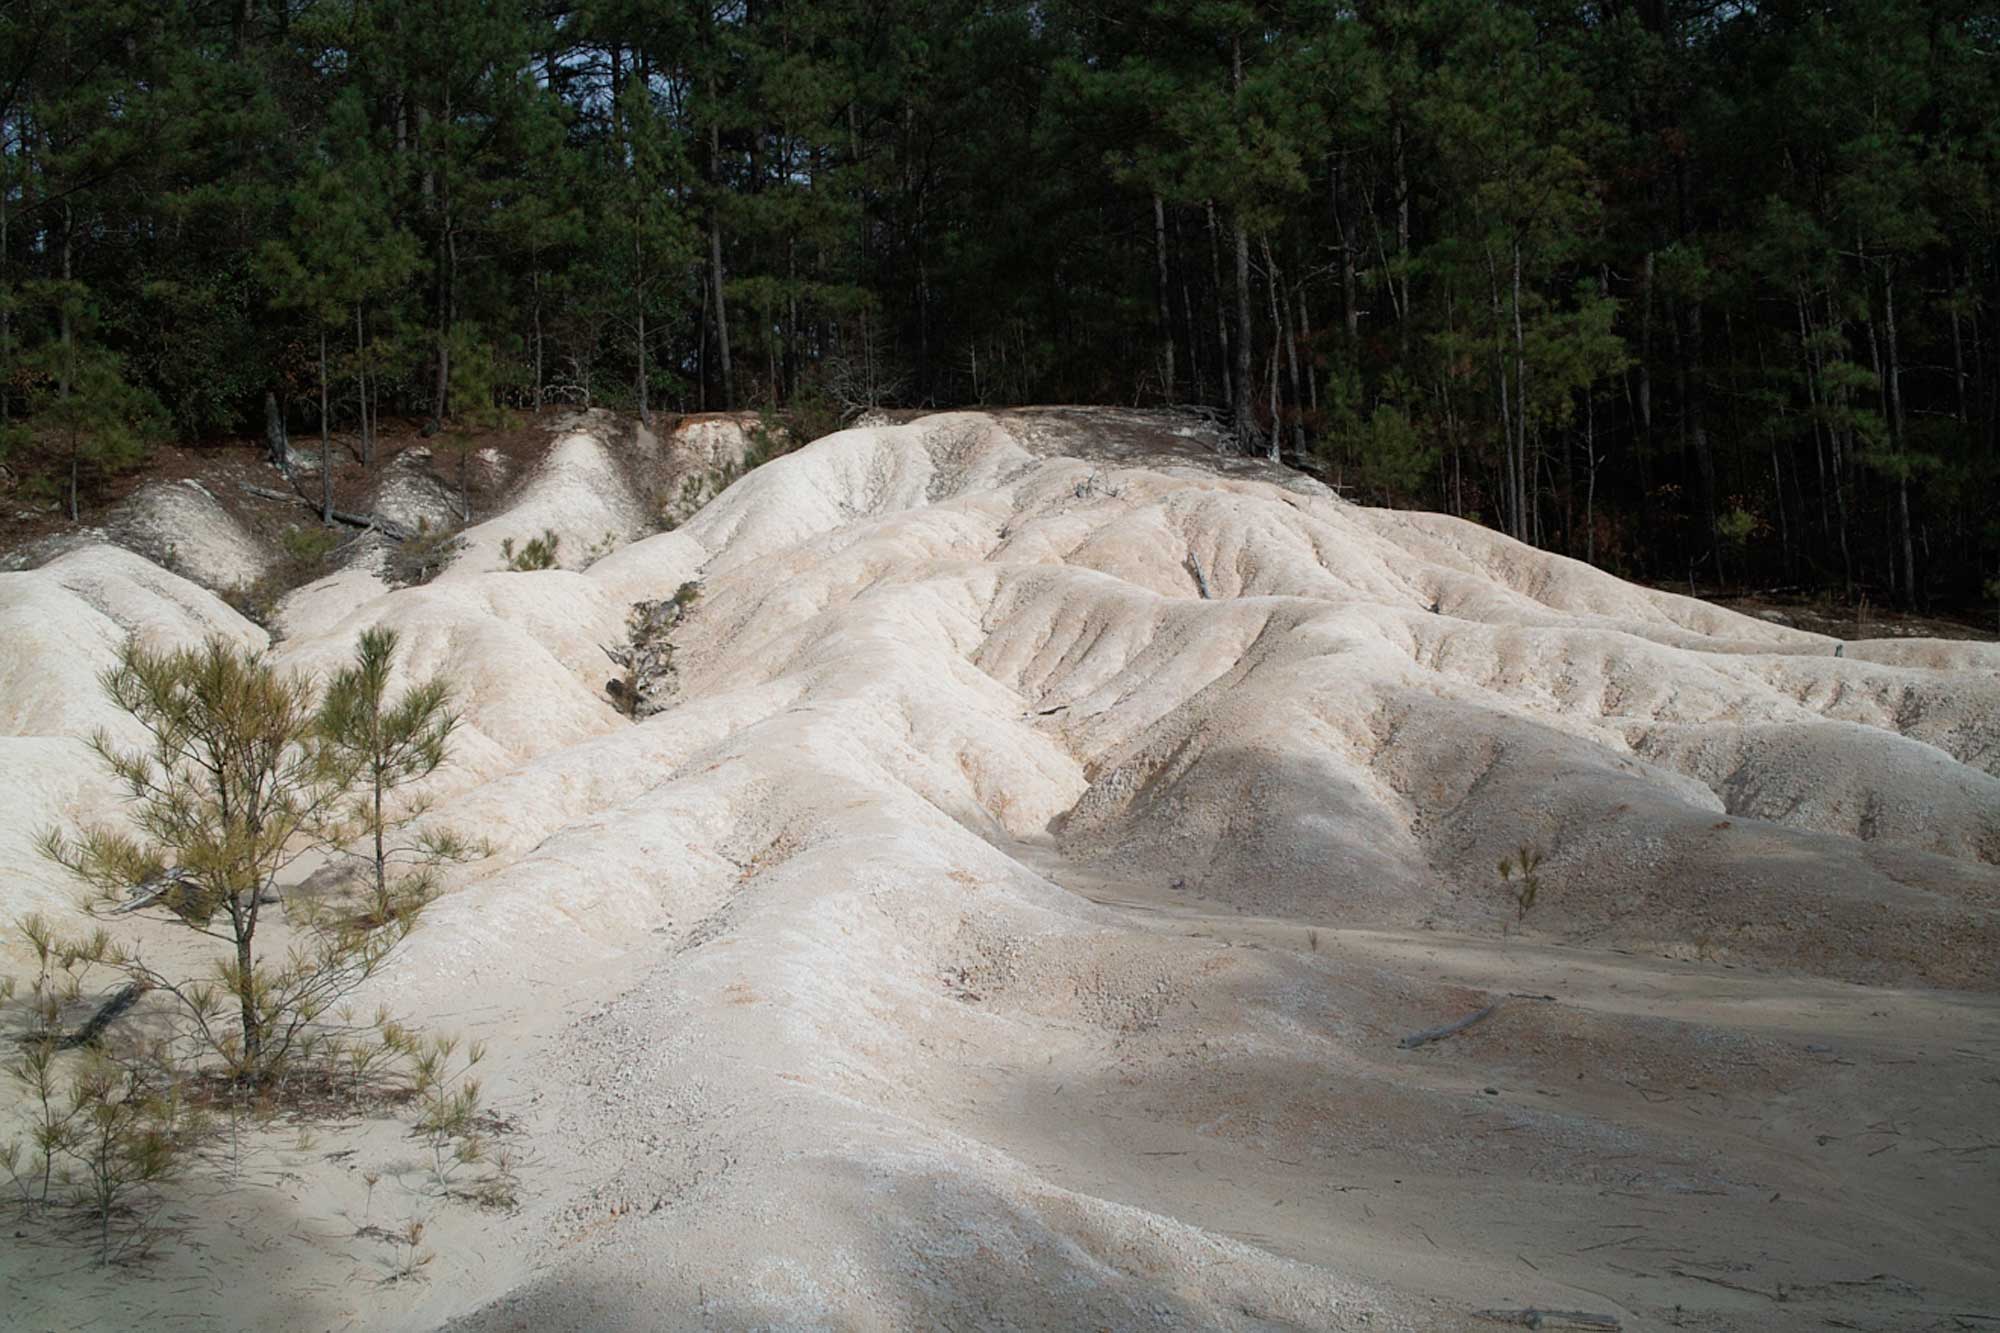 Photograph of kaolin tailings at an old open-pit mine in Aiken, South Carolina.